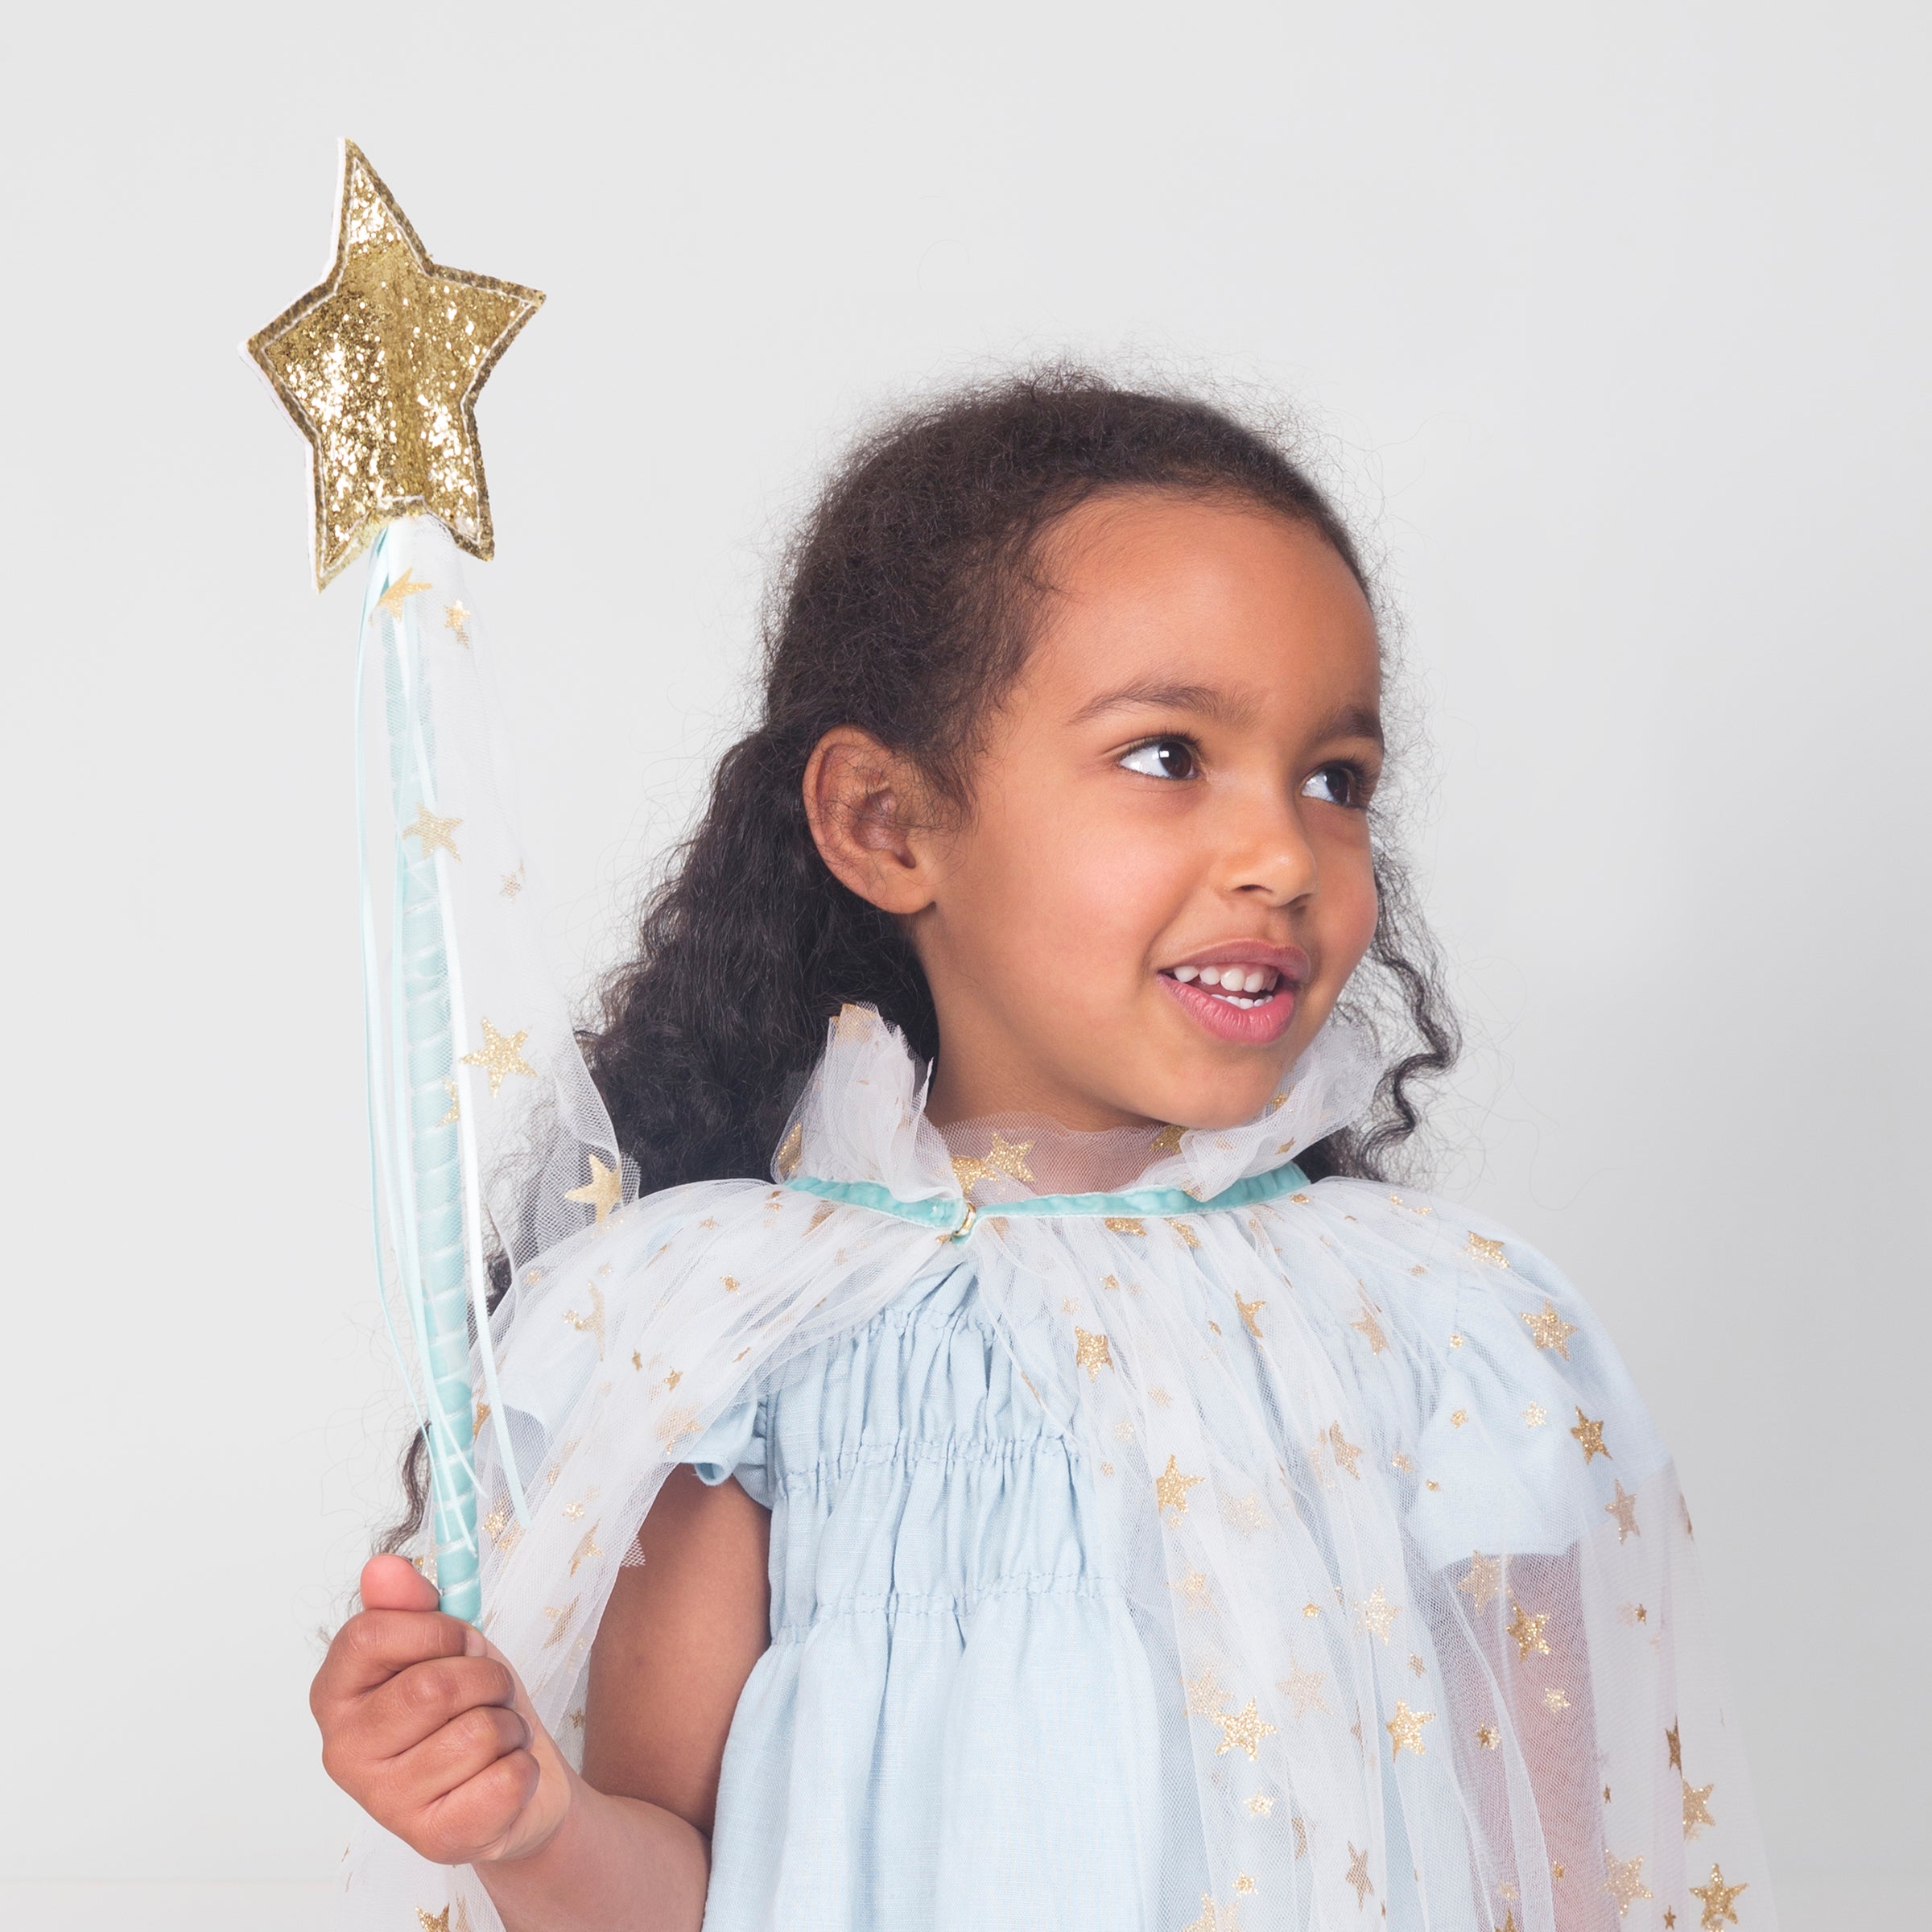 White Tulle Star Wand